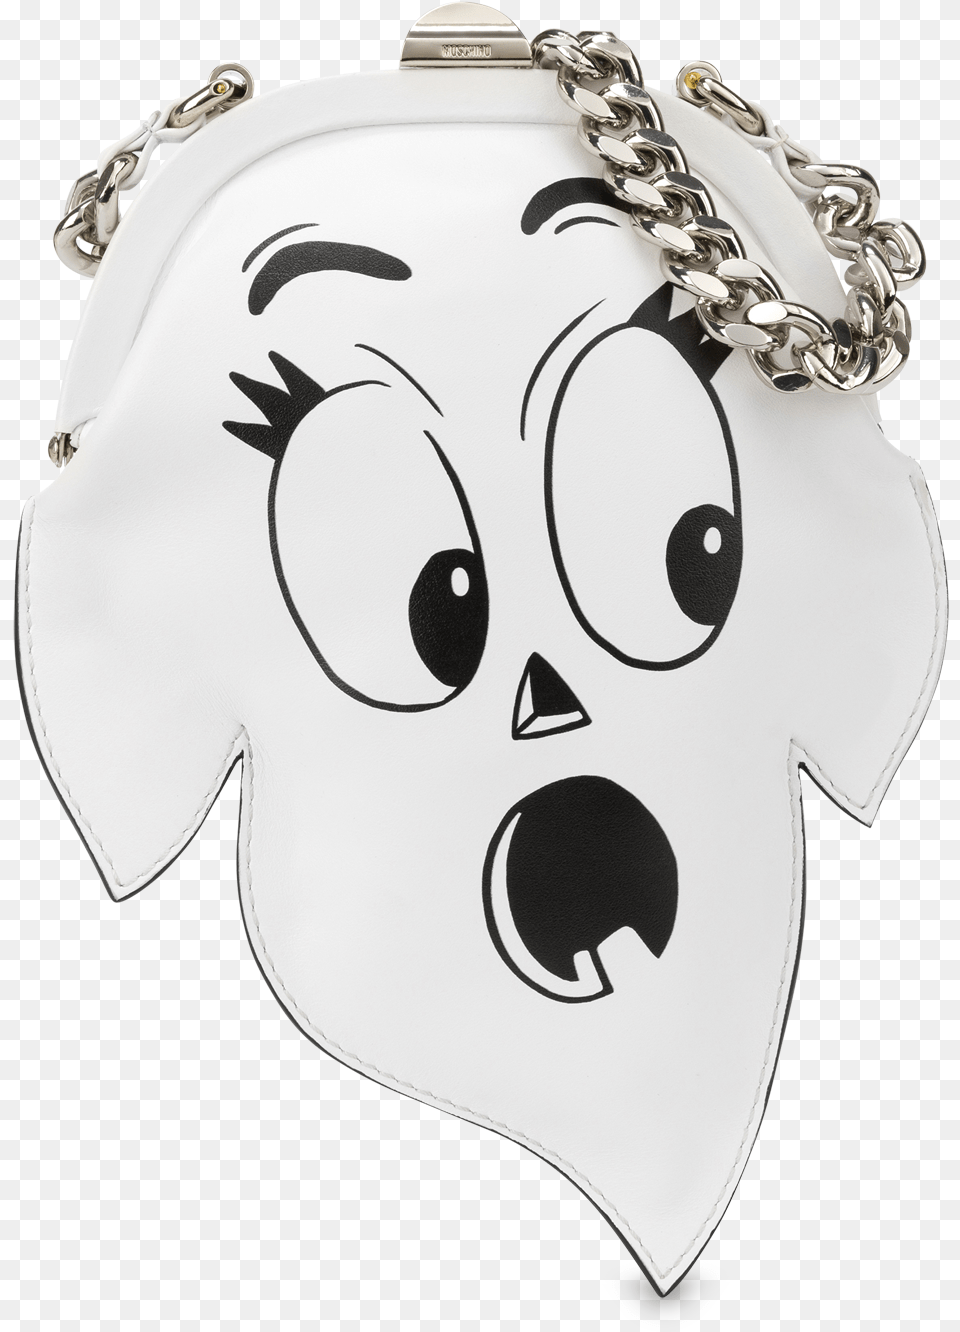 Cartoon, Accessories, Jewelry, Necklace, Bag Png Image